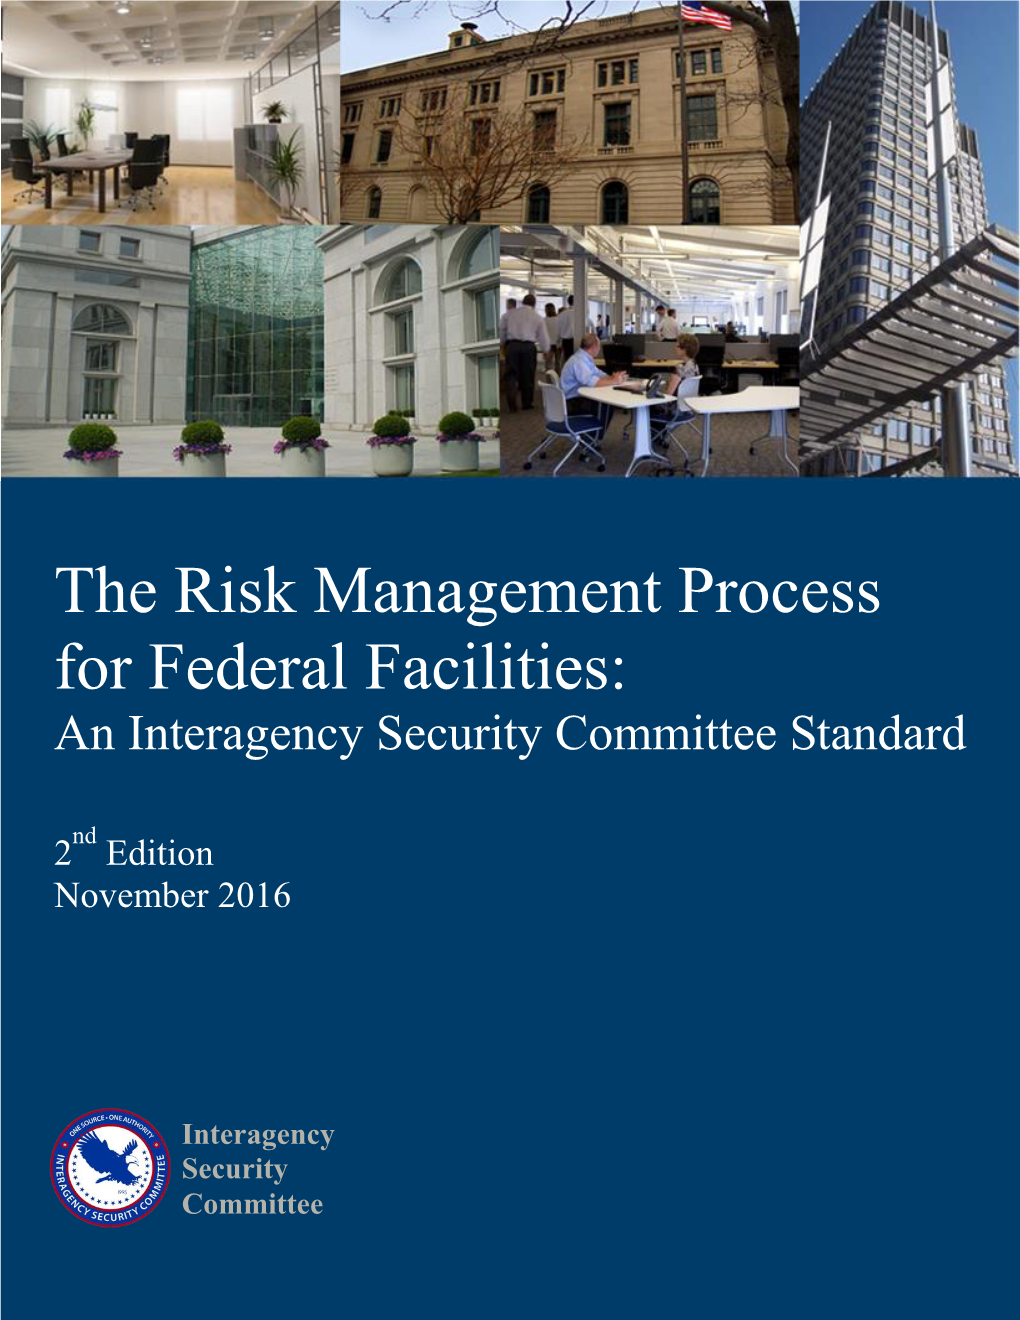 The Risk Management Process for Federal Facilities: an Interagency Security Committee Standard